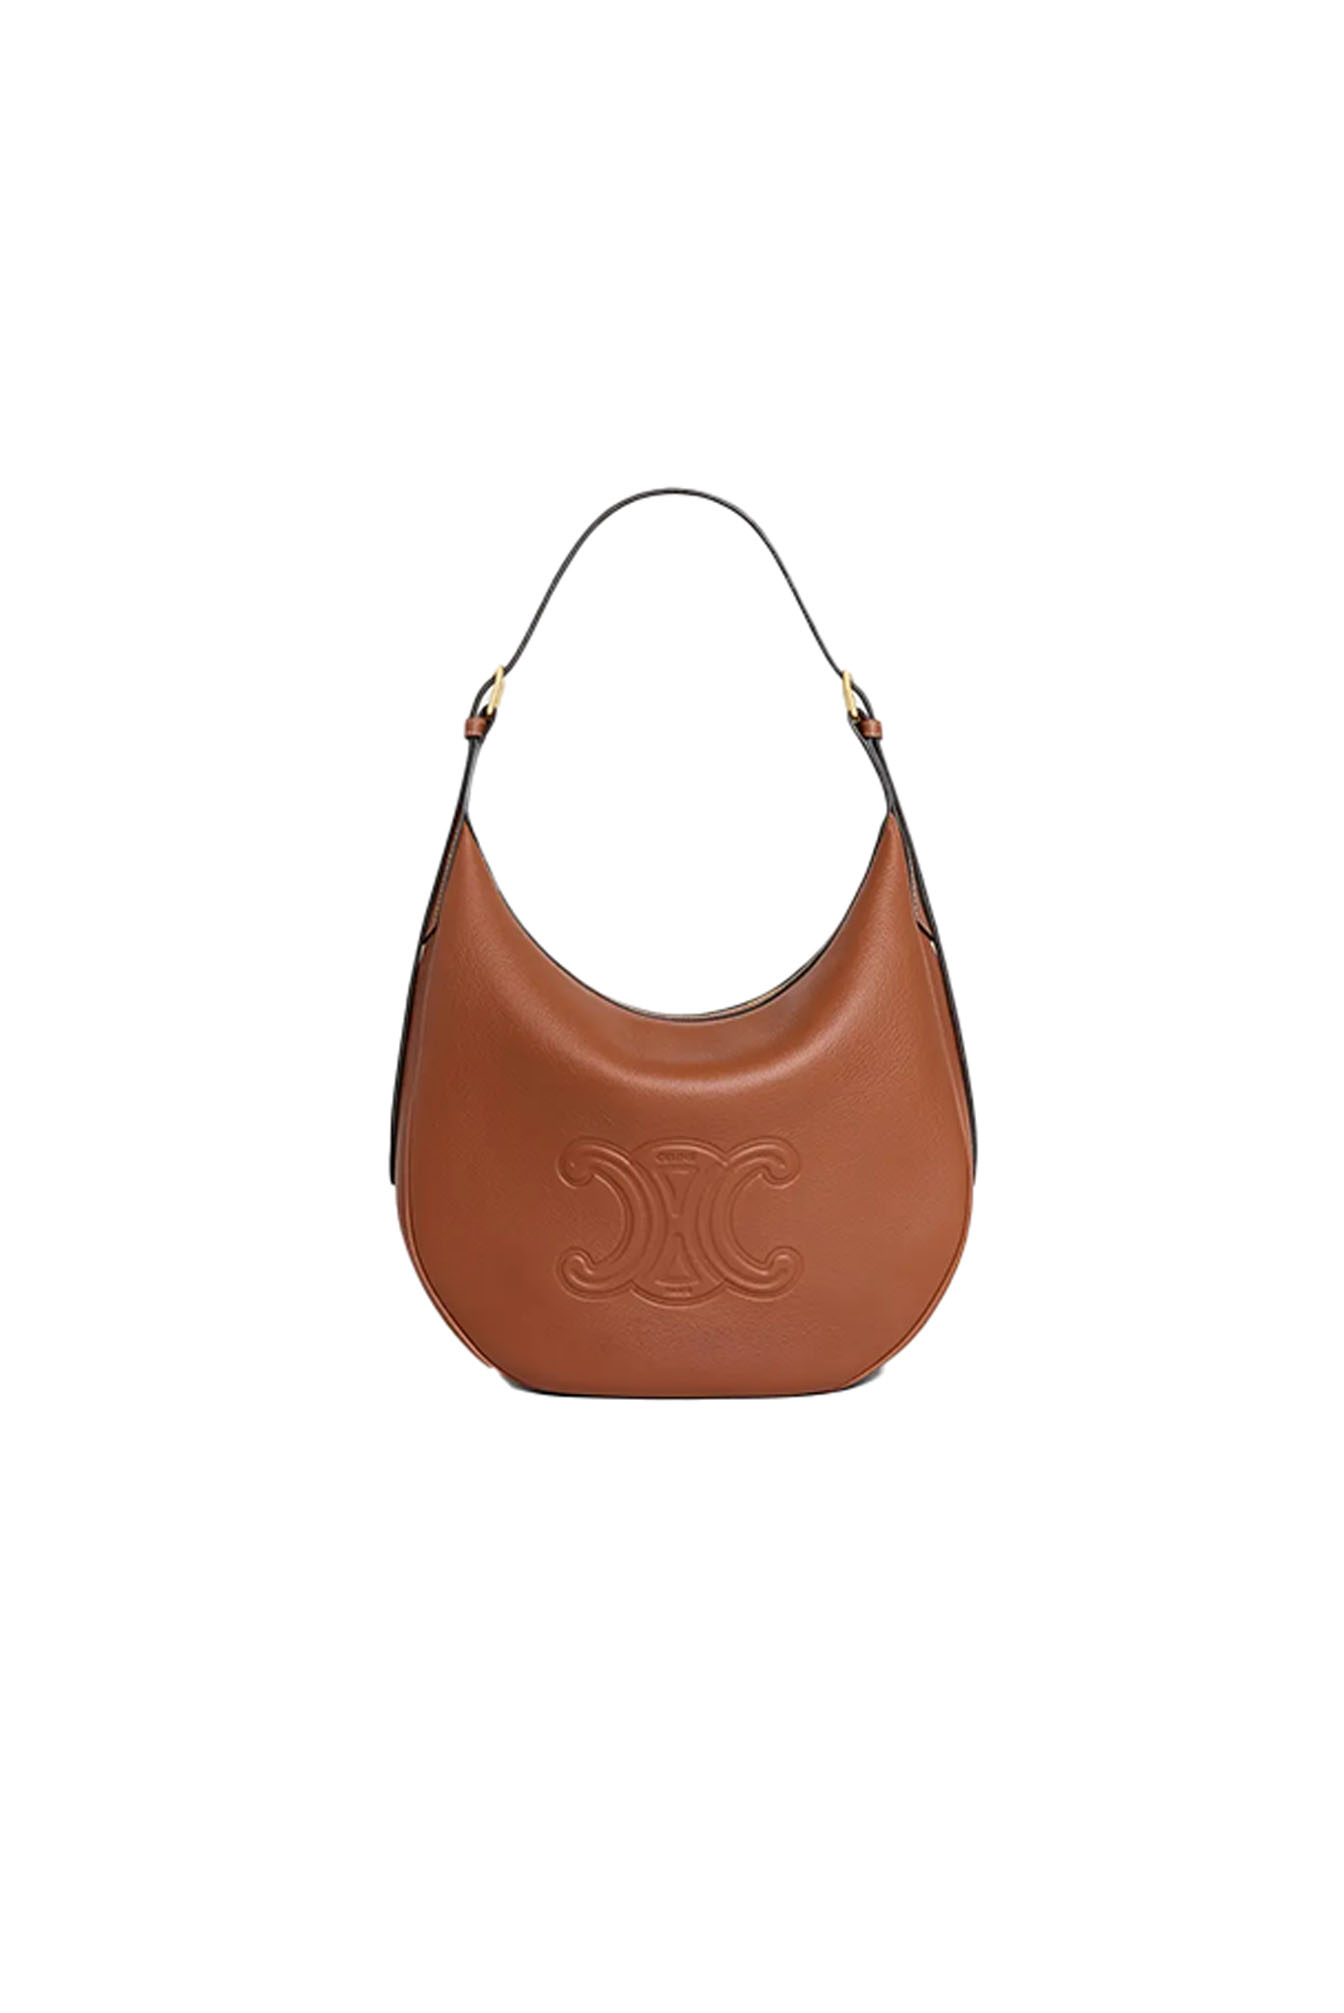 products_0000_HELOISE_BAG_IN_SUPPLE_CALFSKIN_TAN